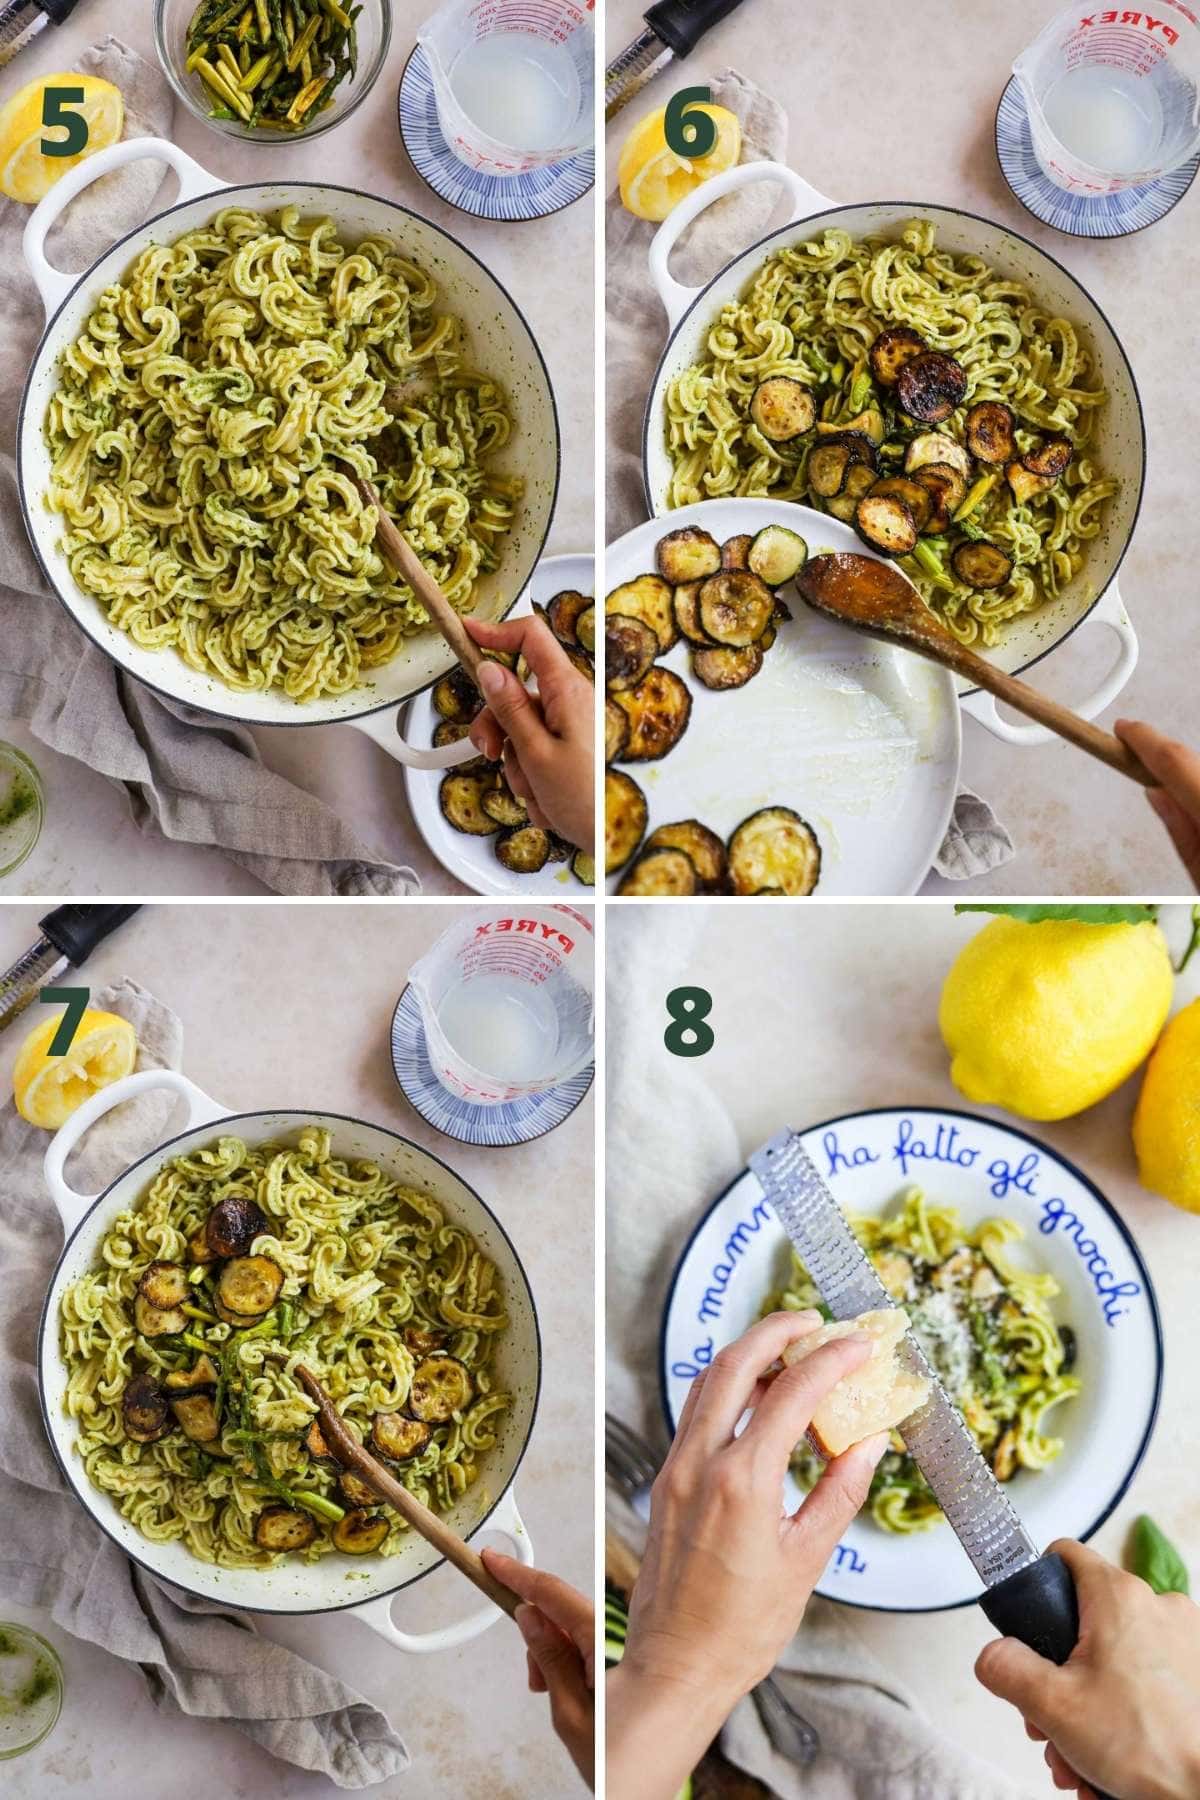 Steps to make veggie pesto pasta, including mixing in the zucchini and asparagus, and serving with grated cheese.